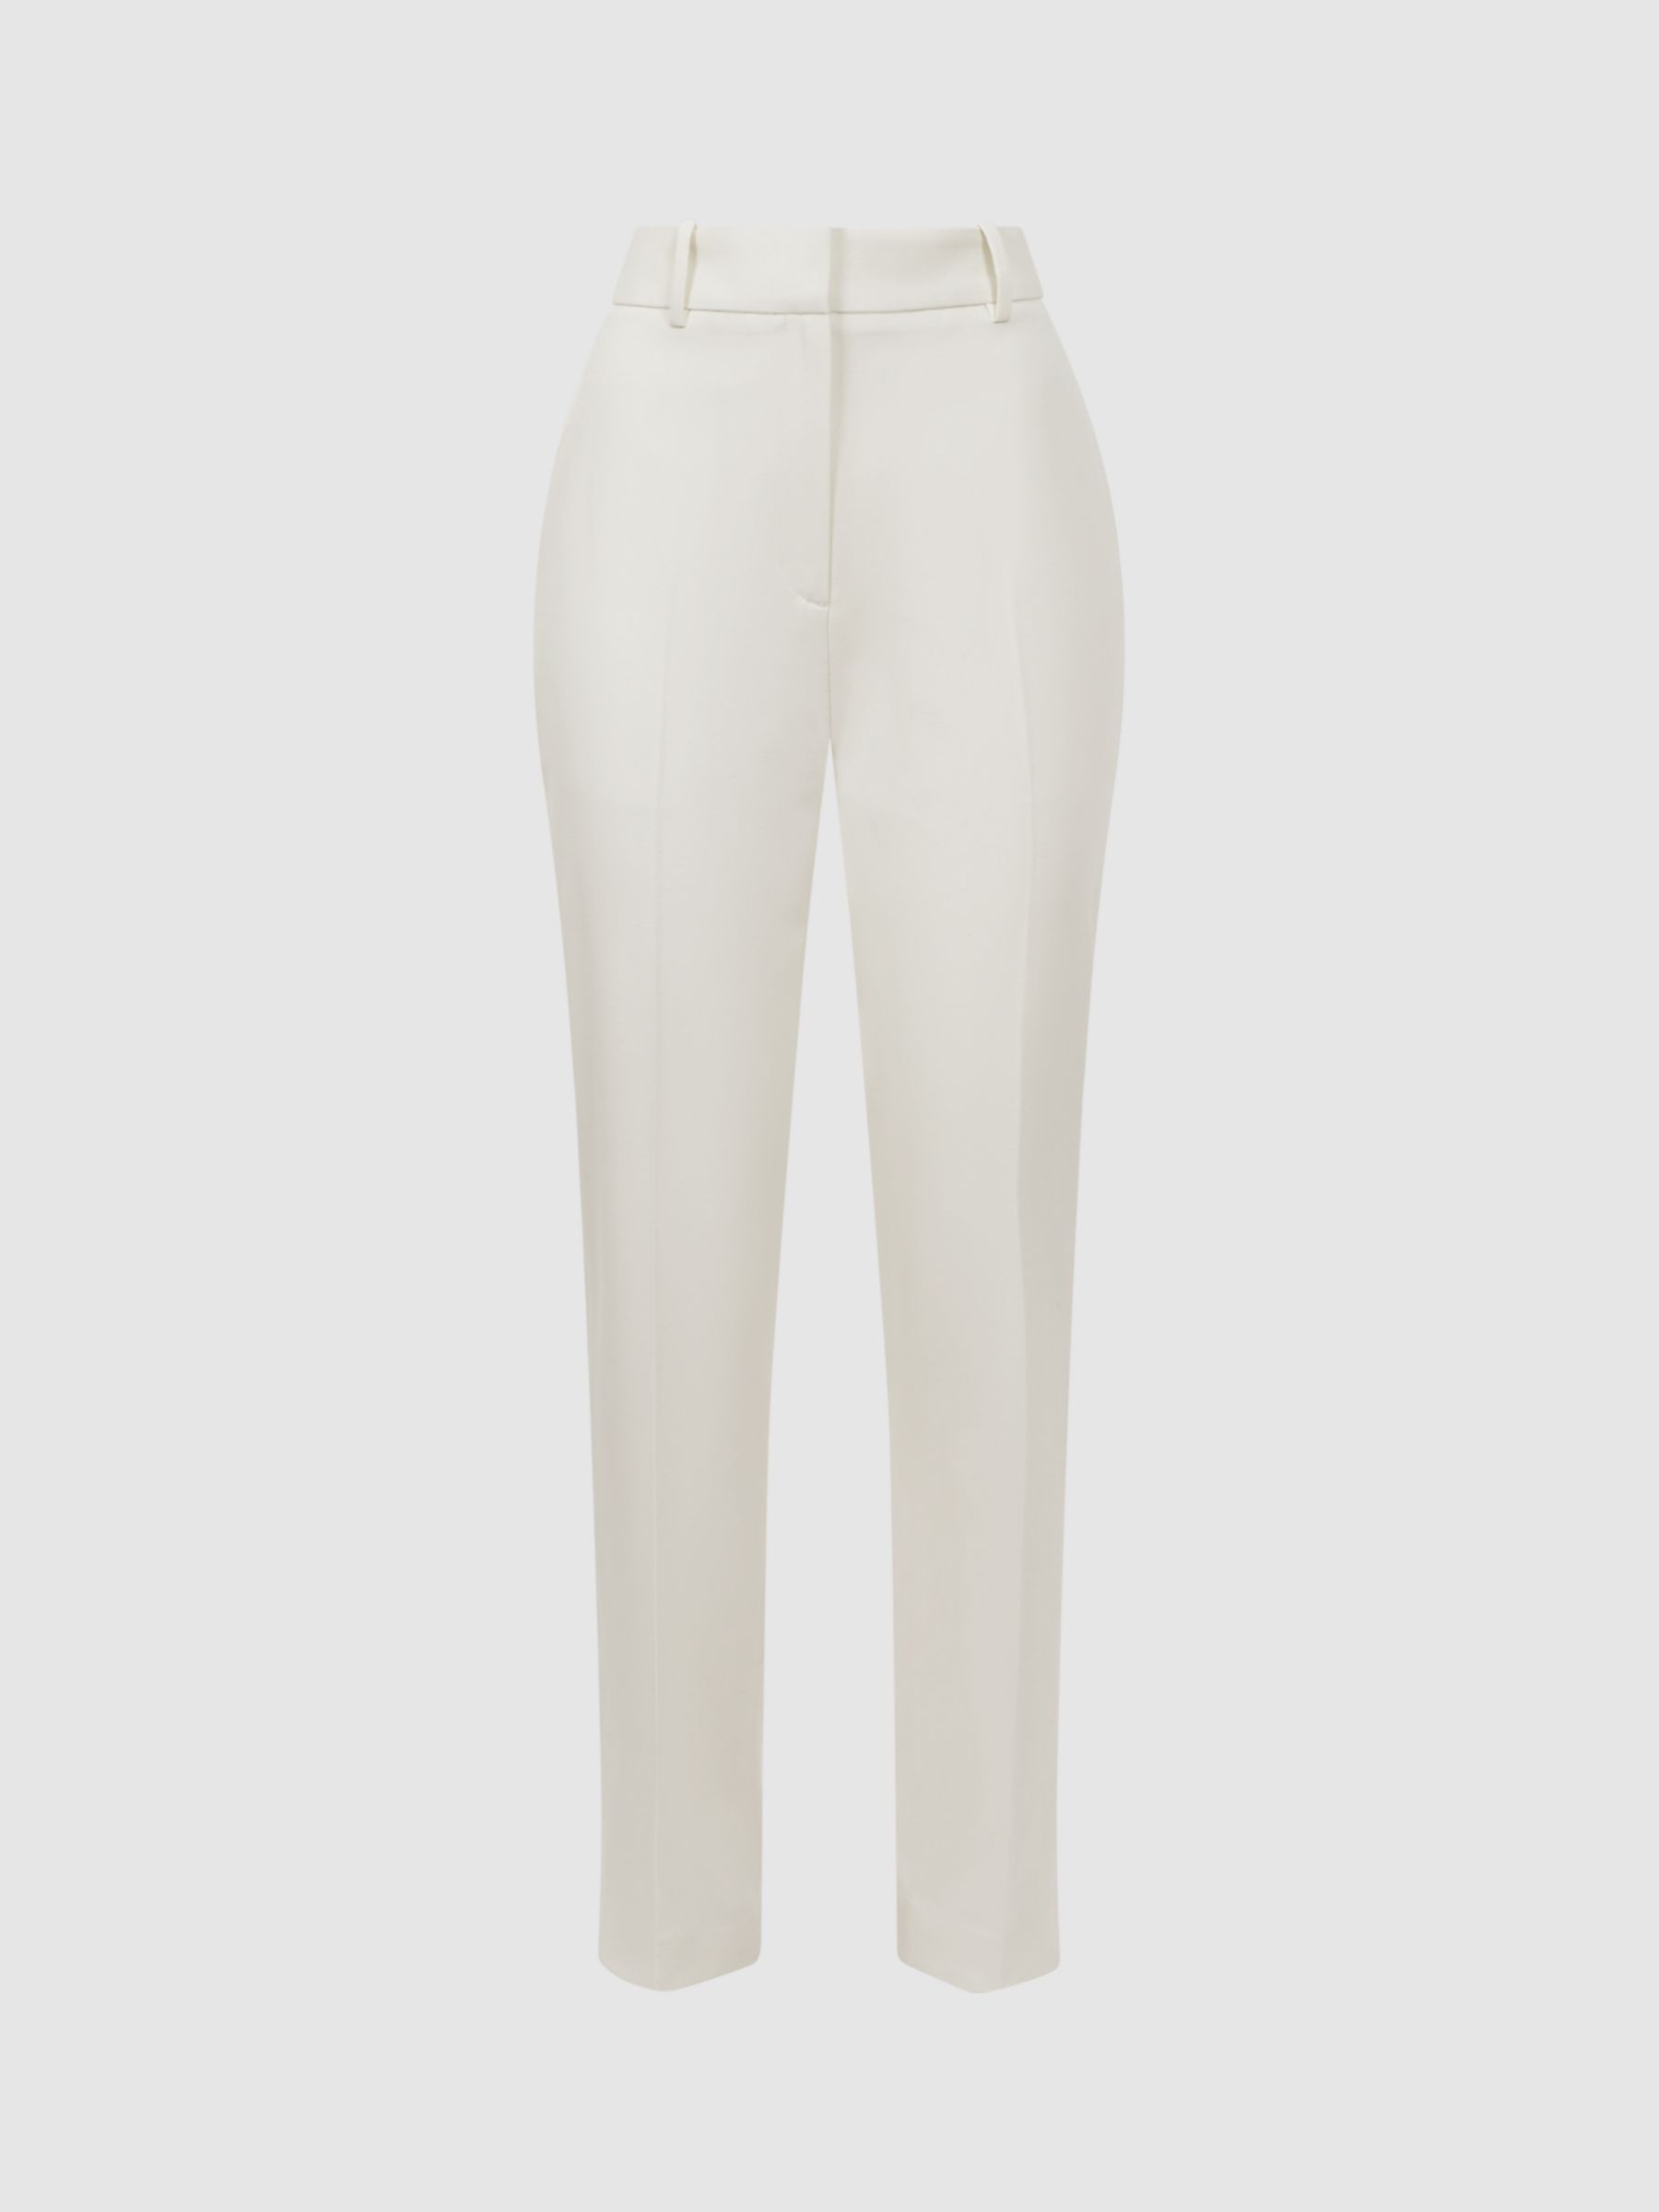 Buy Reiss Mila Slim Fit Trousers, Off White Online at johnlewis.com